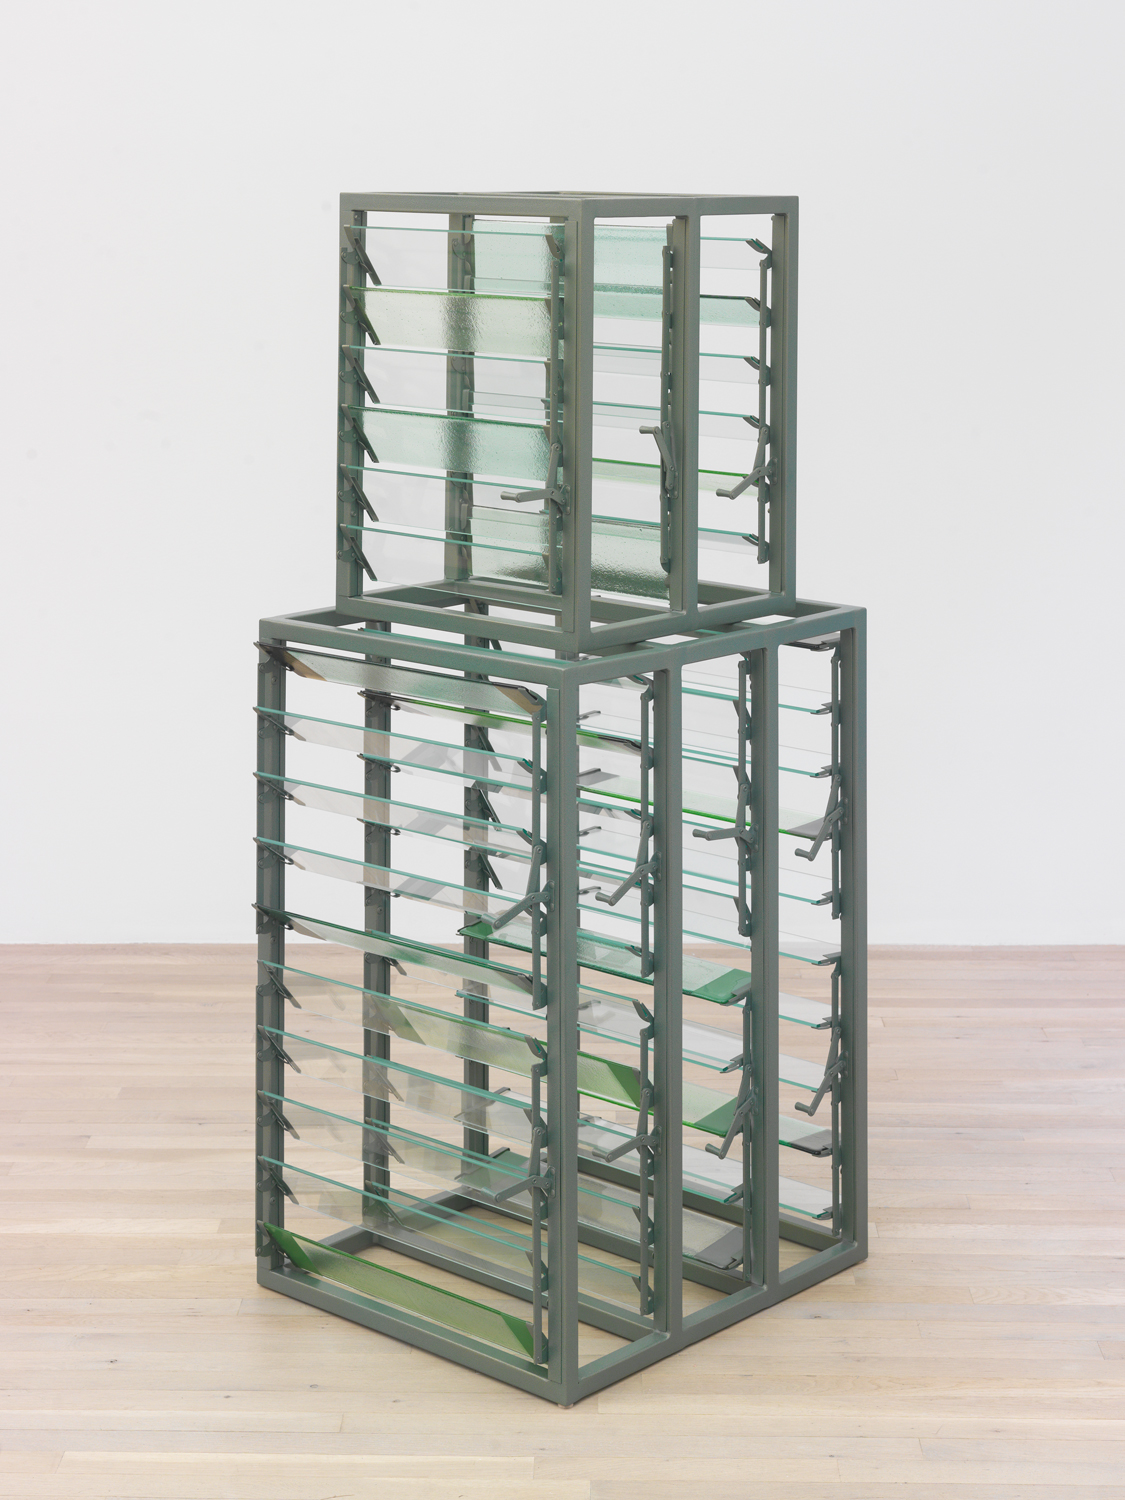 Anne Libby, Inner Echo (green), 2022, Powder coated steel and aluminum, glass, 59 x 22 1/2 x 30 in.